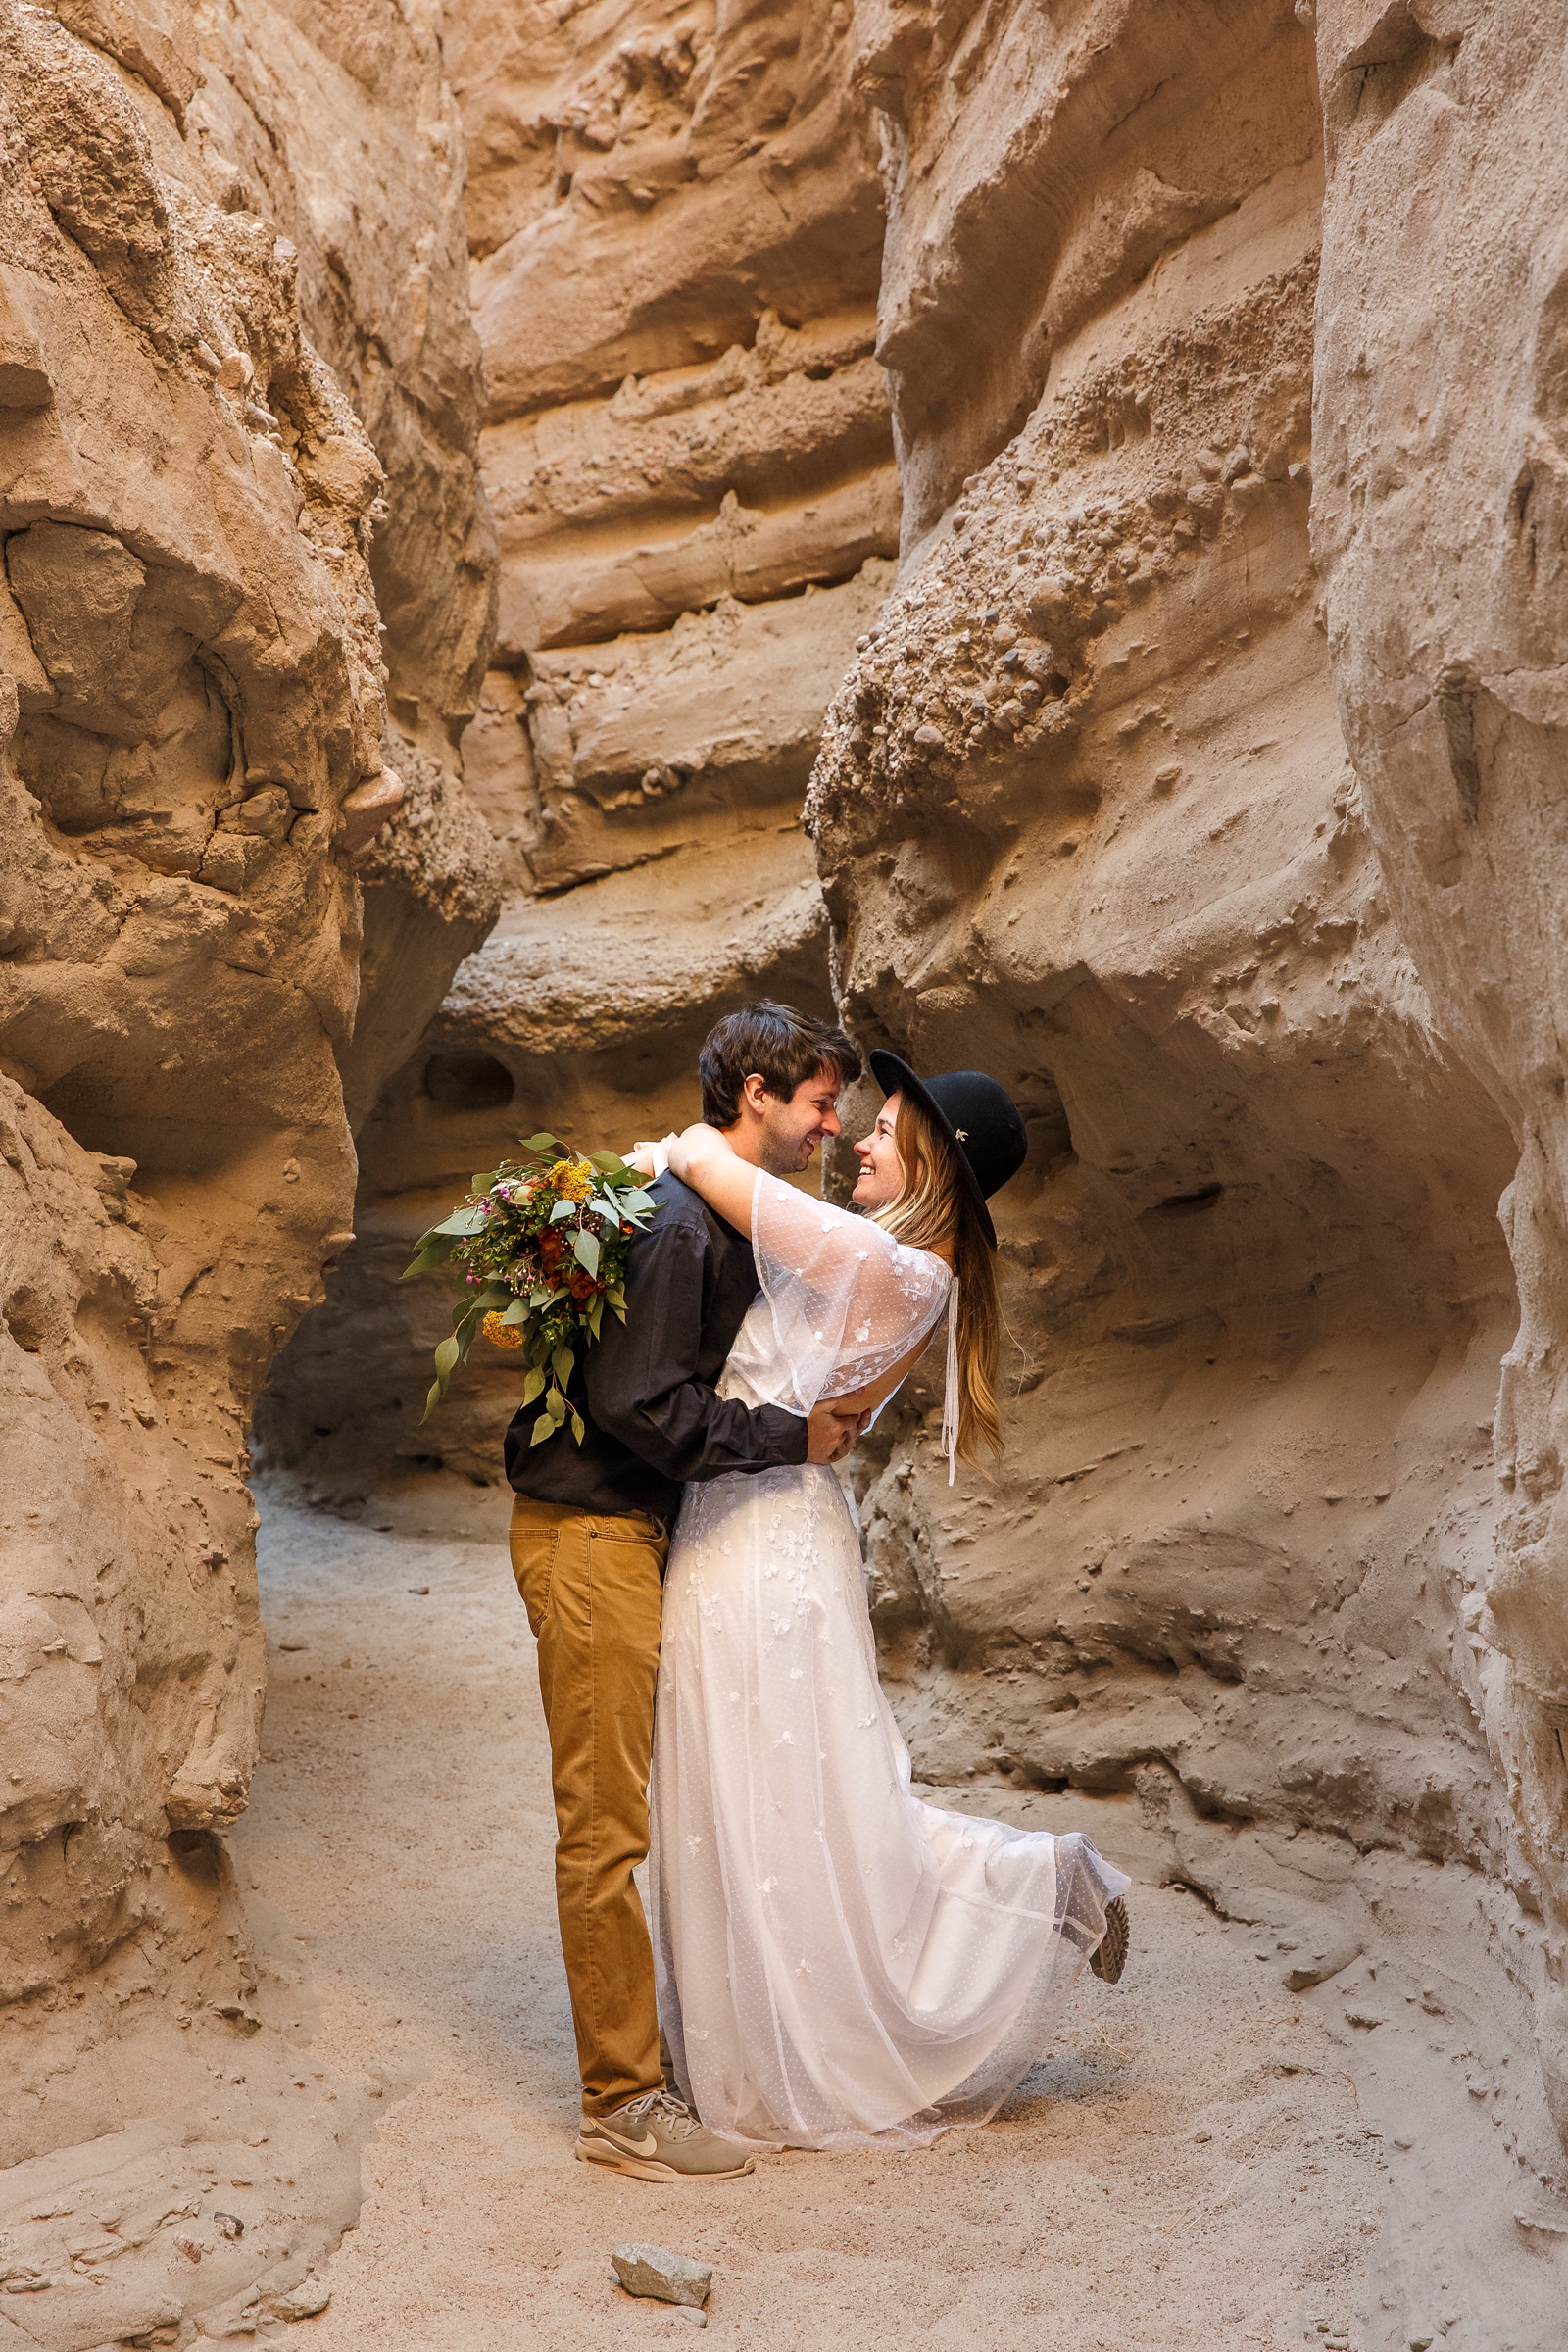 This couple embrace during their outdoor elopement at this slot canyon.